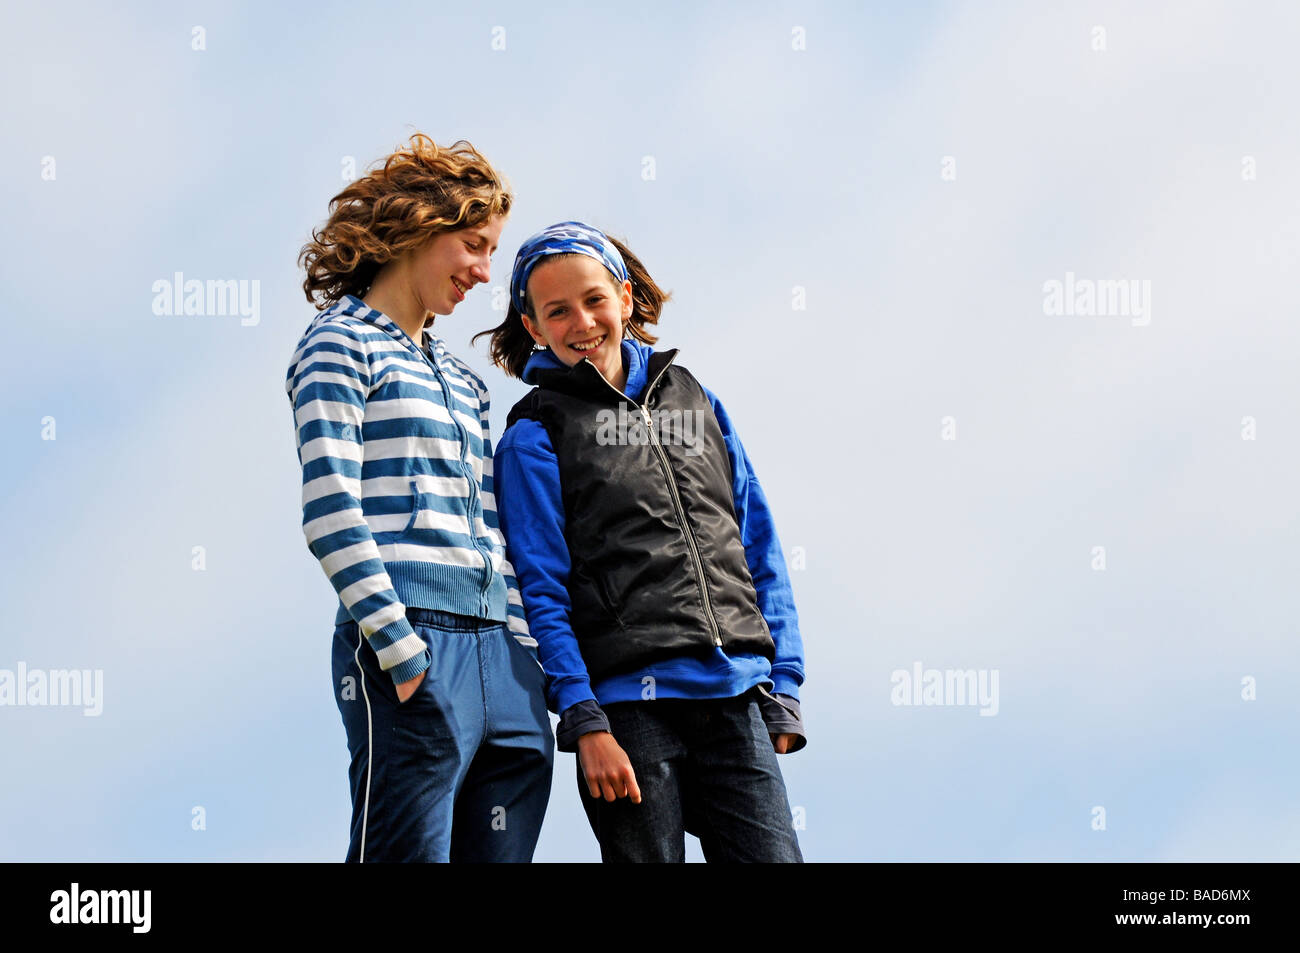 outdoor portrait of two girls chatting Stock Photo